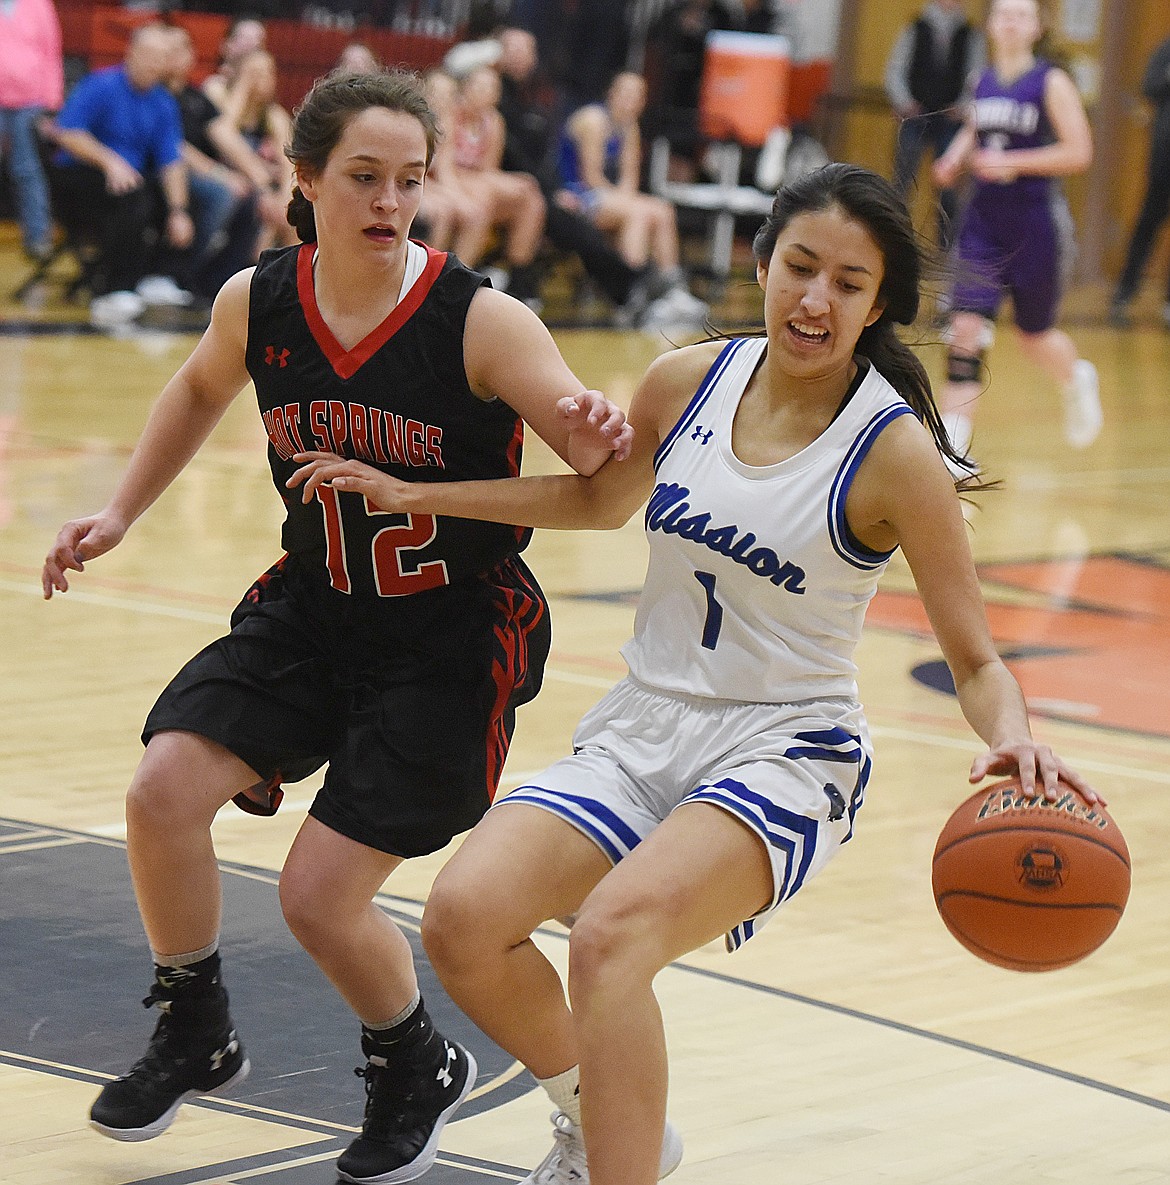 SYDNEY JACKSON of Hot Springs puts pressure on Karolyna Buck of Mission in the Mission Valley All-Star girls&#146; contest.